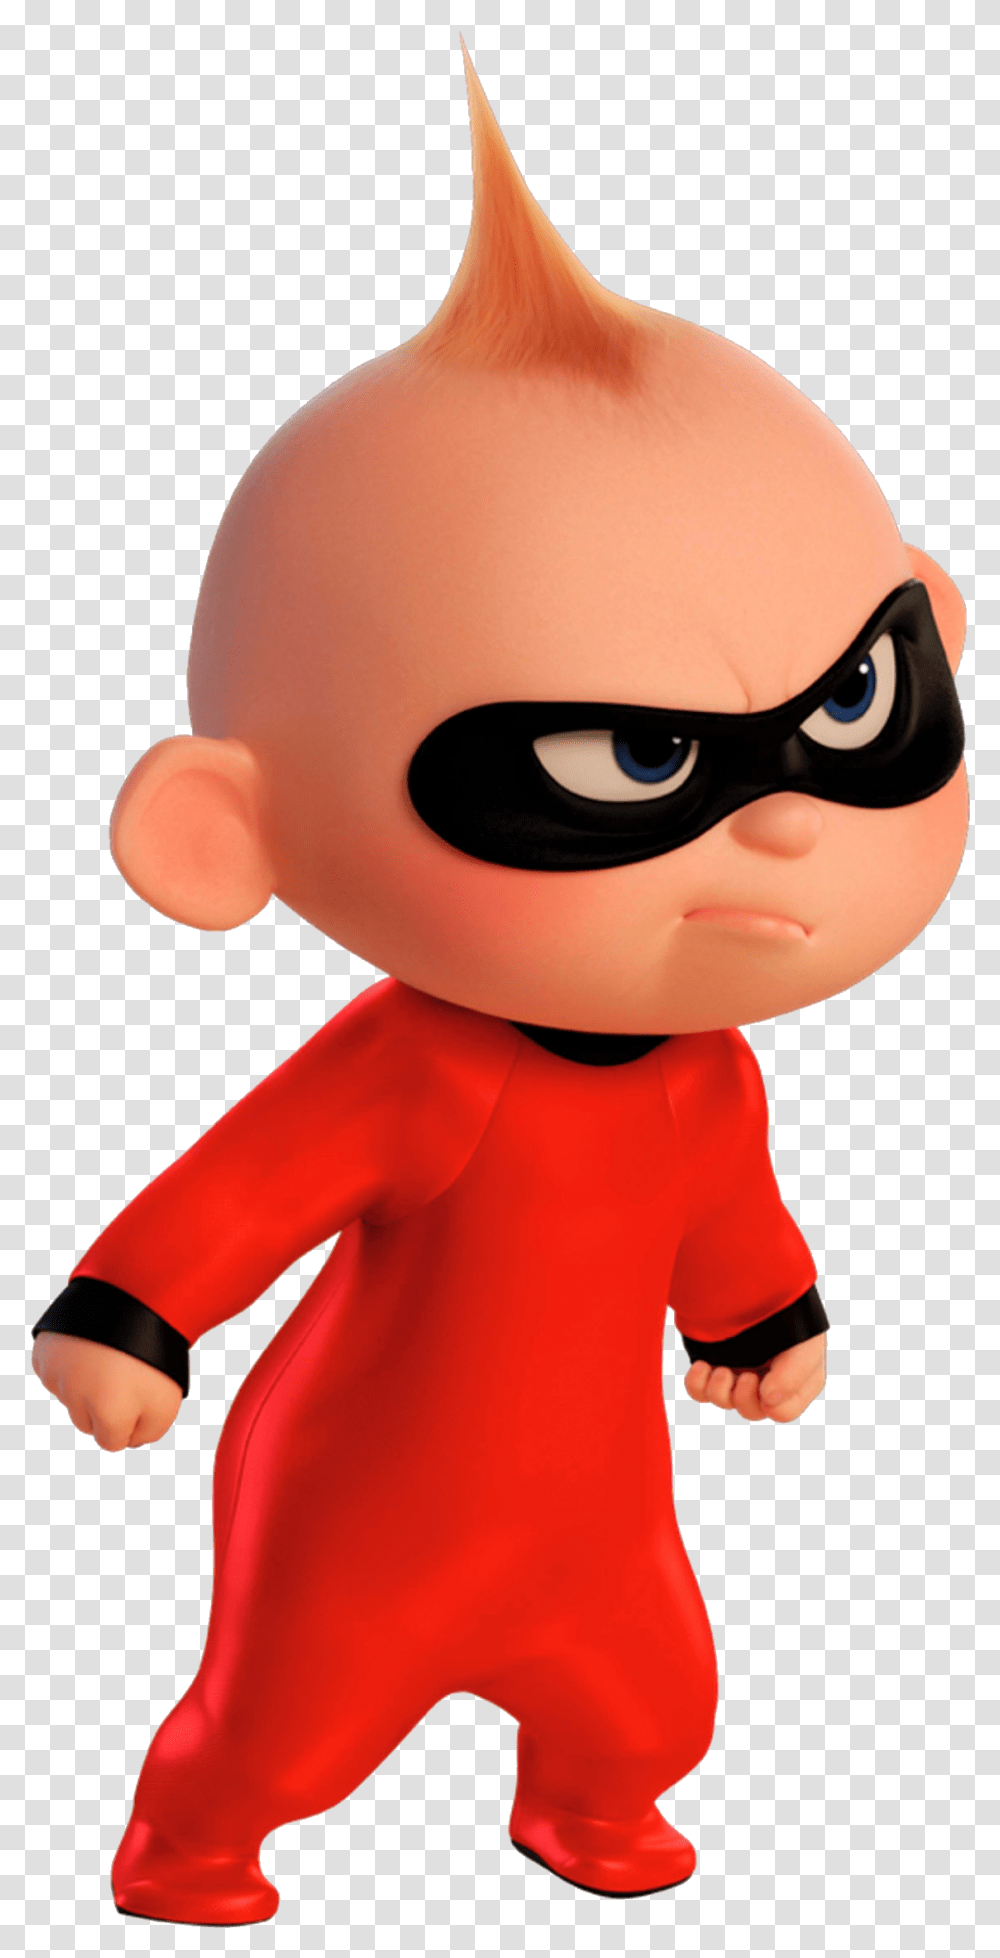 Jack Jack And Raccoon Download Incredibles 2 Jack Jack Raccoon, Doll, Toy, Sunglasses, Accessories Transparent Png